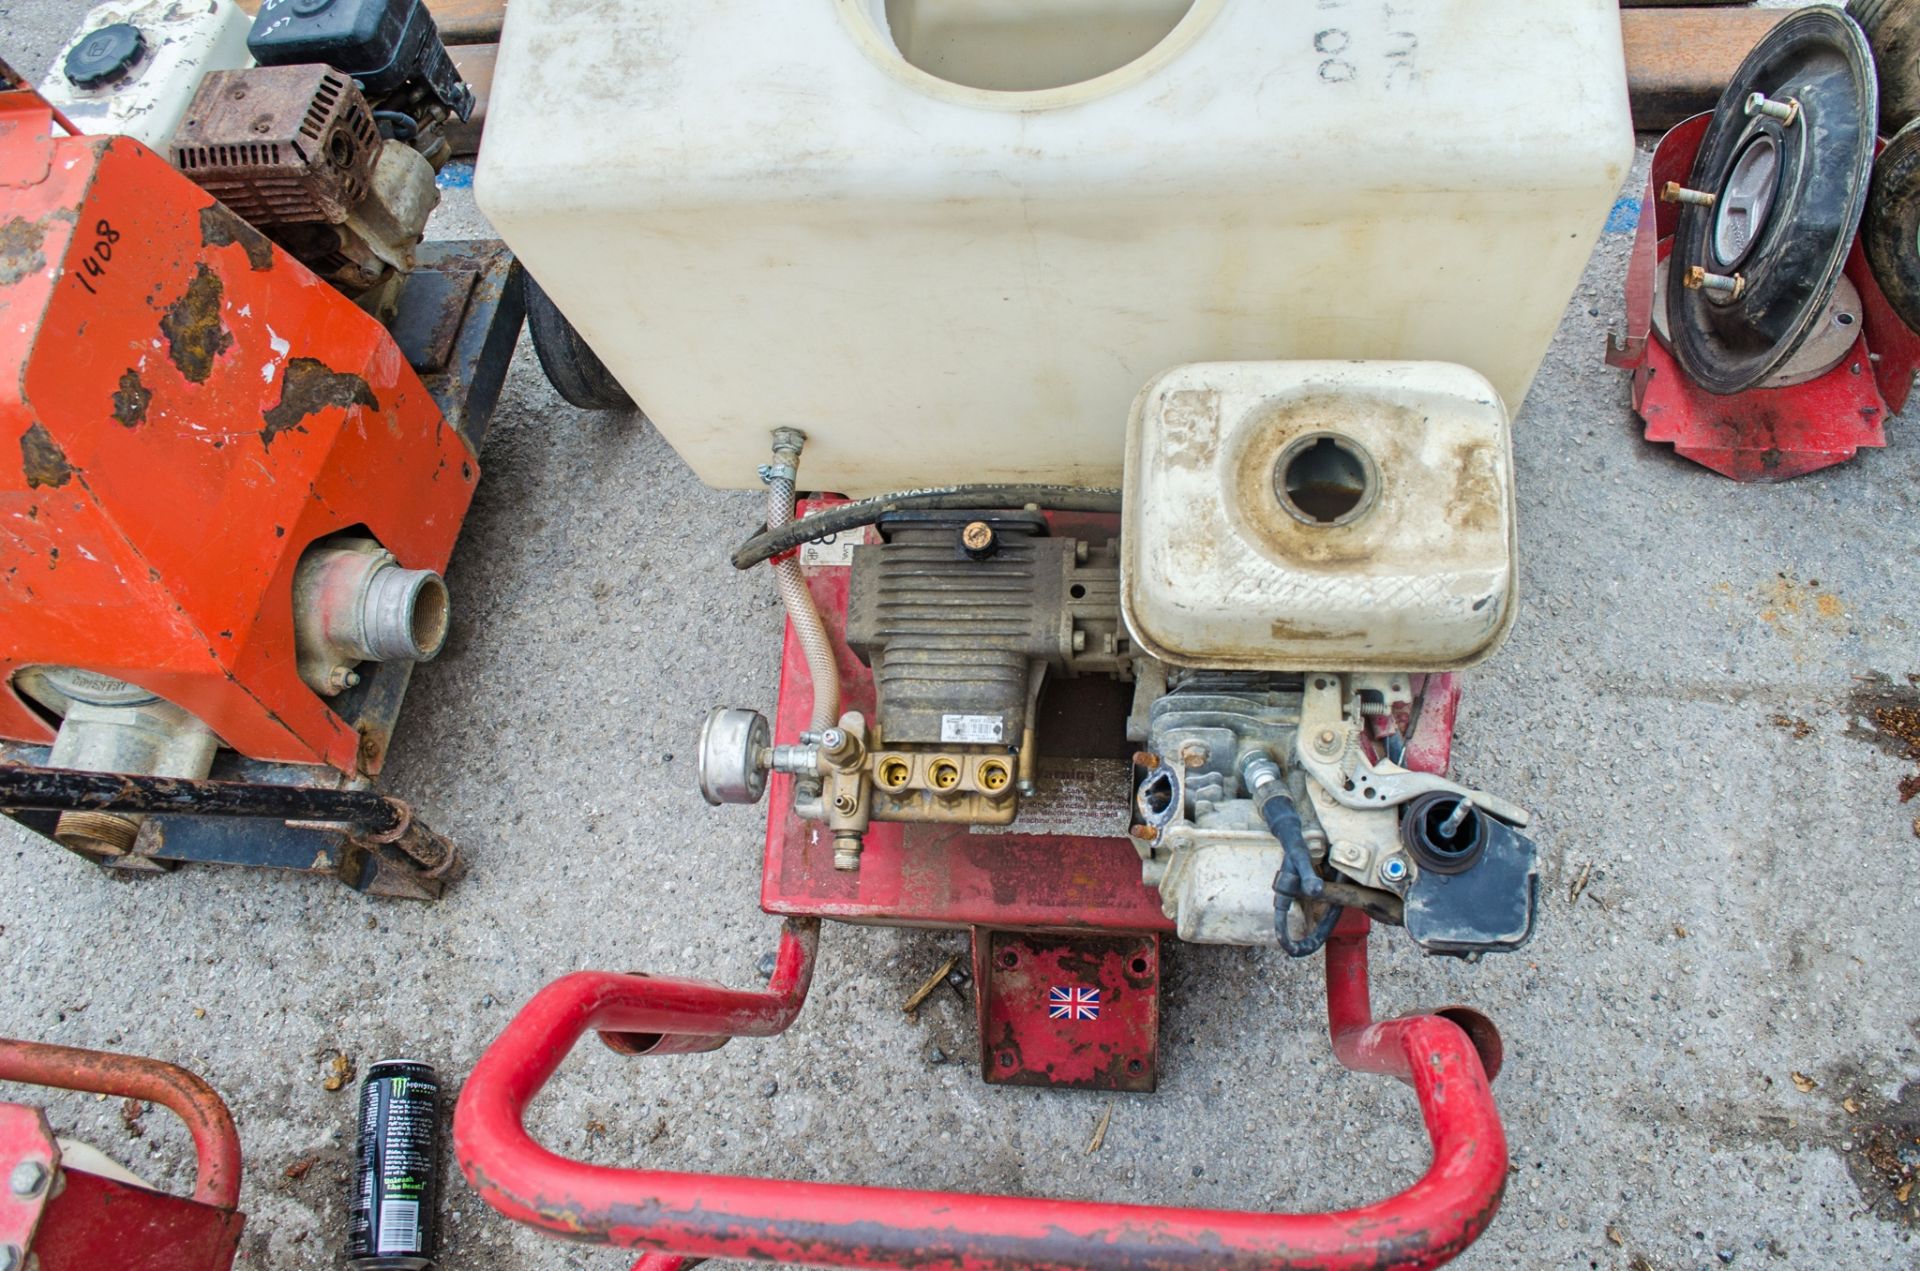 Demon petrol driven pressure washer ** Parts missing ** 1001-0947 - Image 2 of 3